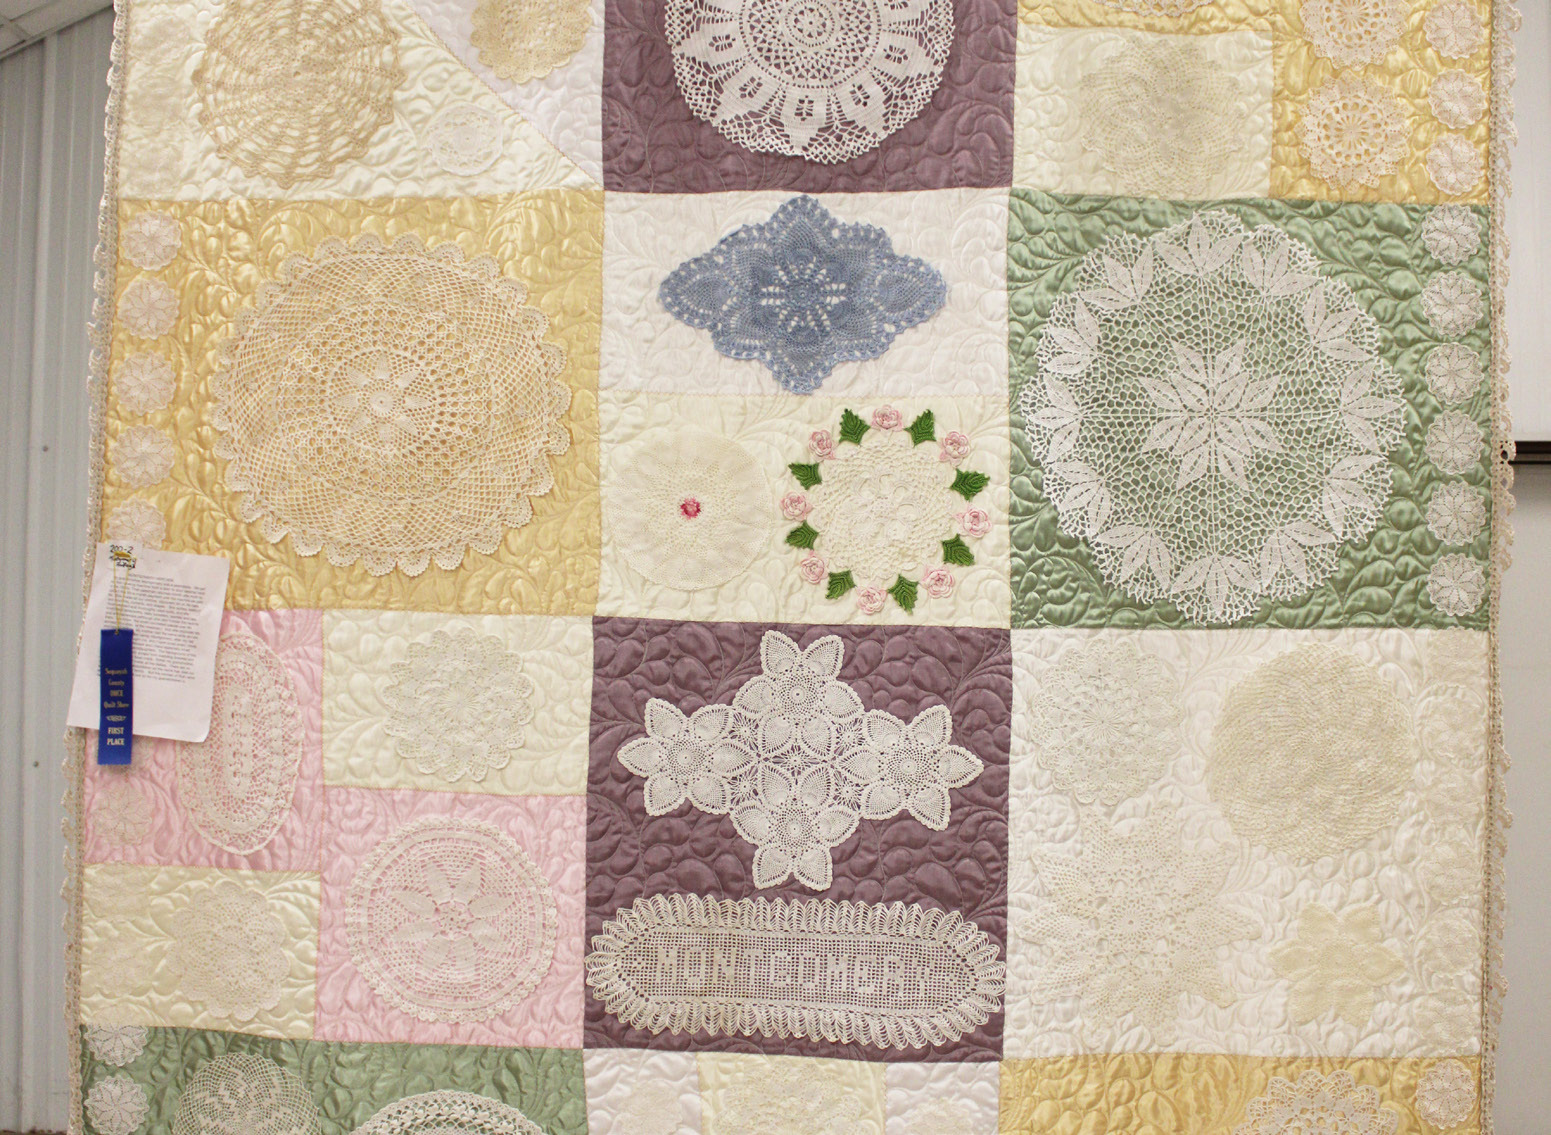 Montgomery Heritage, submitted by Rita Milam, received first place in the mixed techniques division of the recent OHCE Quilt Show at the Sequoyah County Fairgrounds. The quilt, made by her grandmother Montgomery, a seamstress who purchased her first sewing machine from a door-to-door salesman in the 1920s, was made from scraps of wedding dresses and doilies.